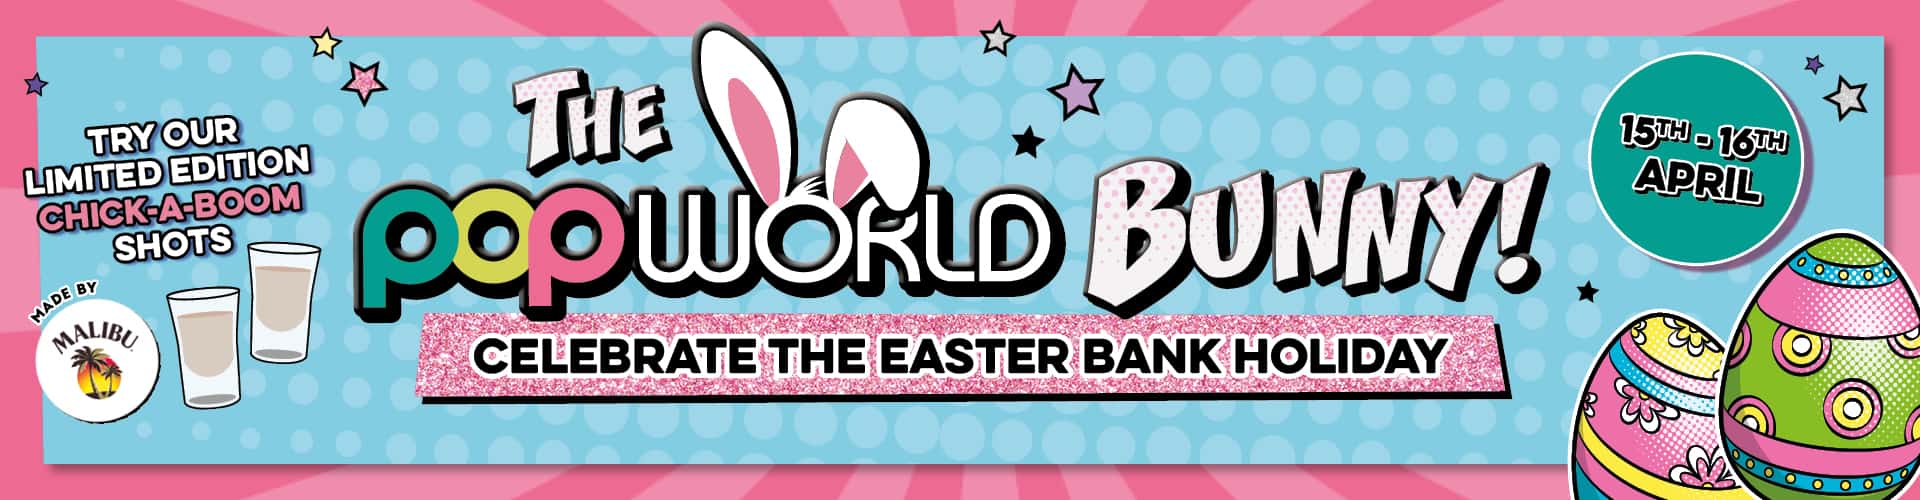 The Popworld Bunny Easter Bank Holiday